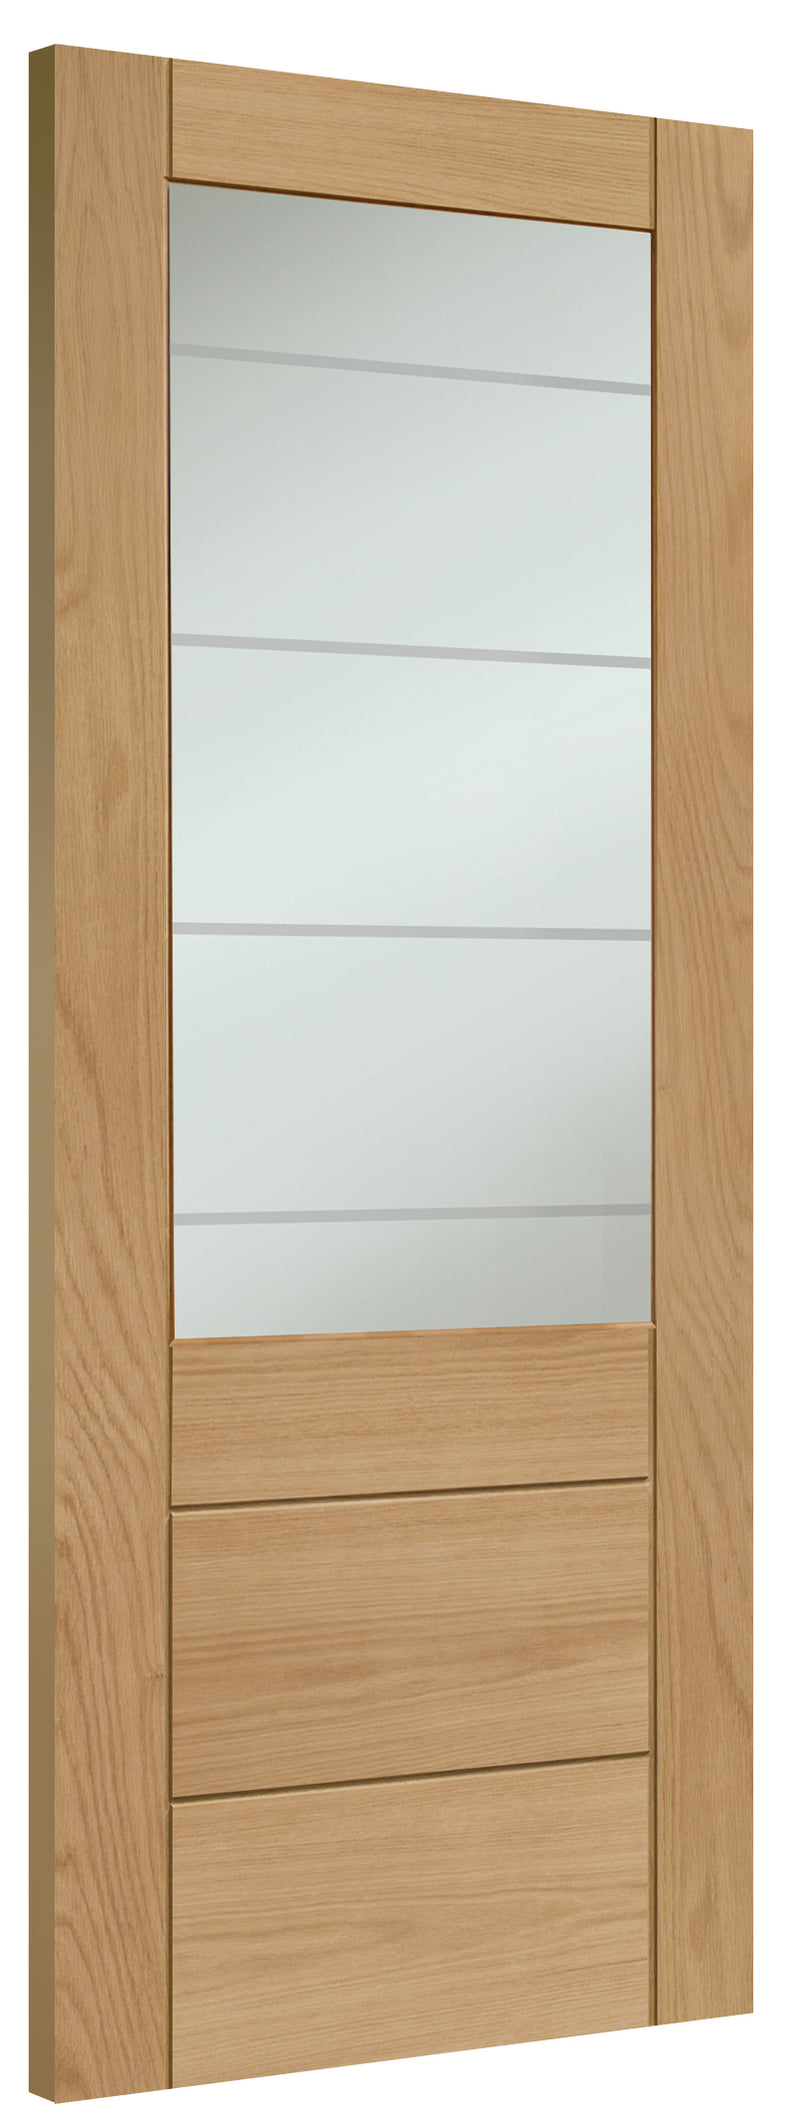 XL Joinery Internal Essential Oak Palermo 2XG with Clear Etched Glass